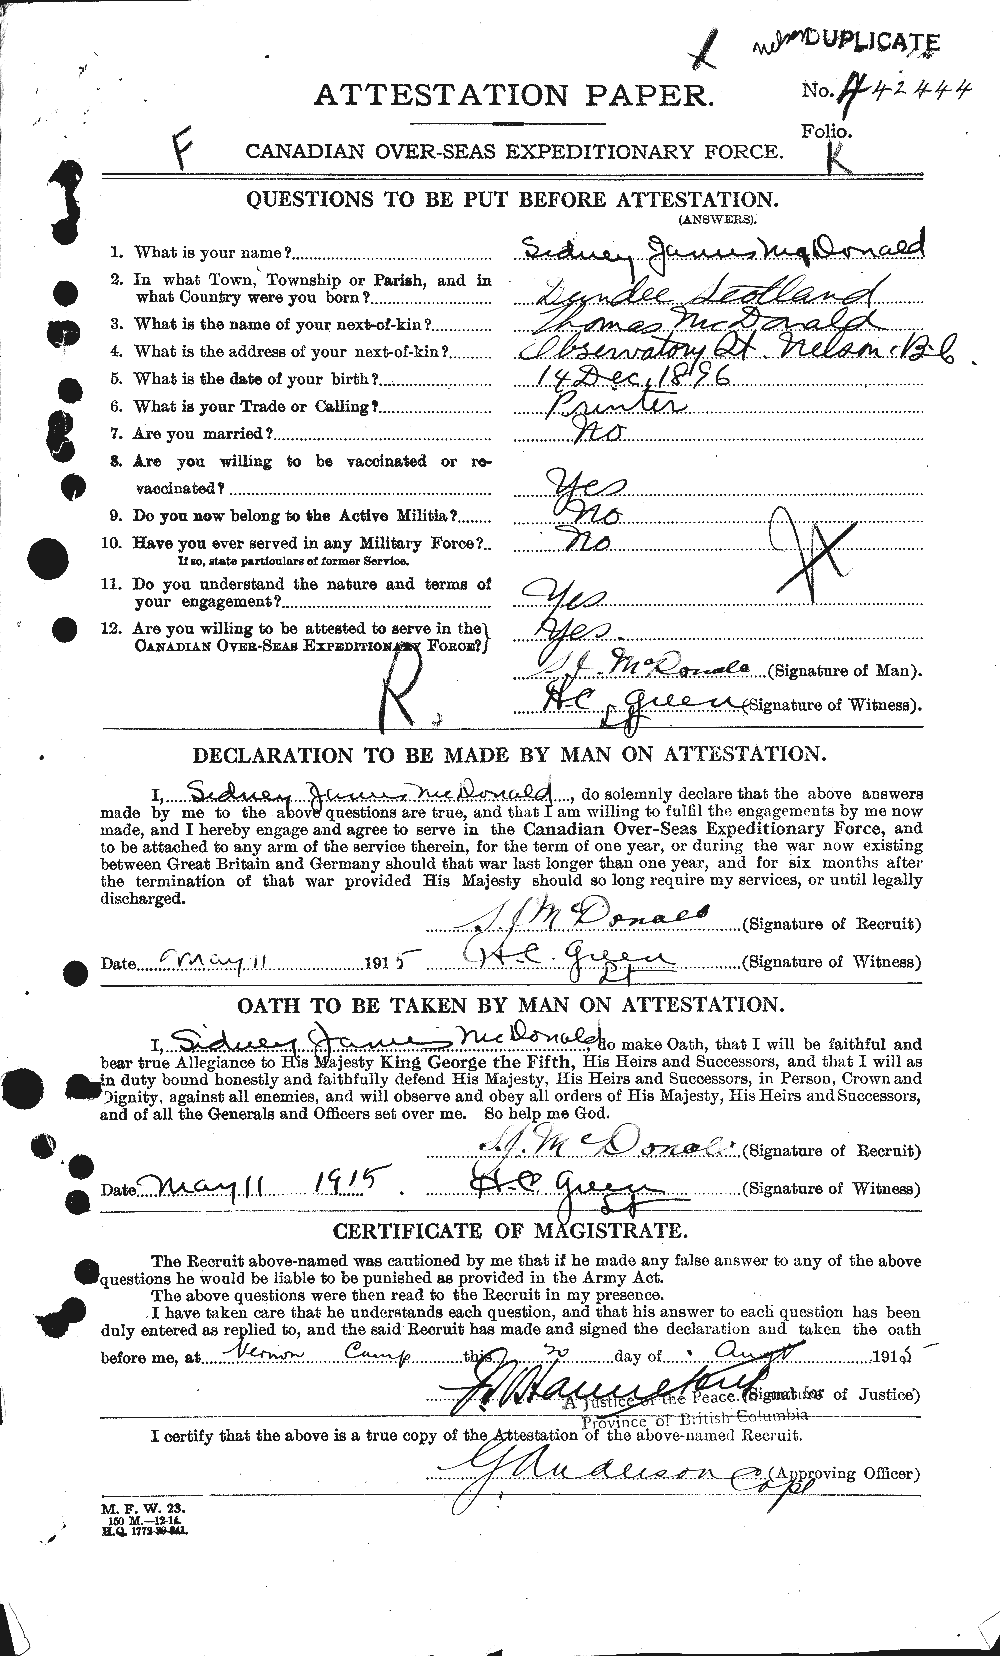 Personnel Records of the First World War - CEF 515890a